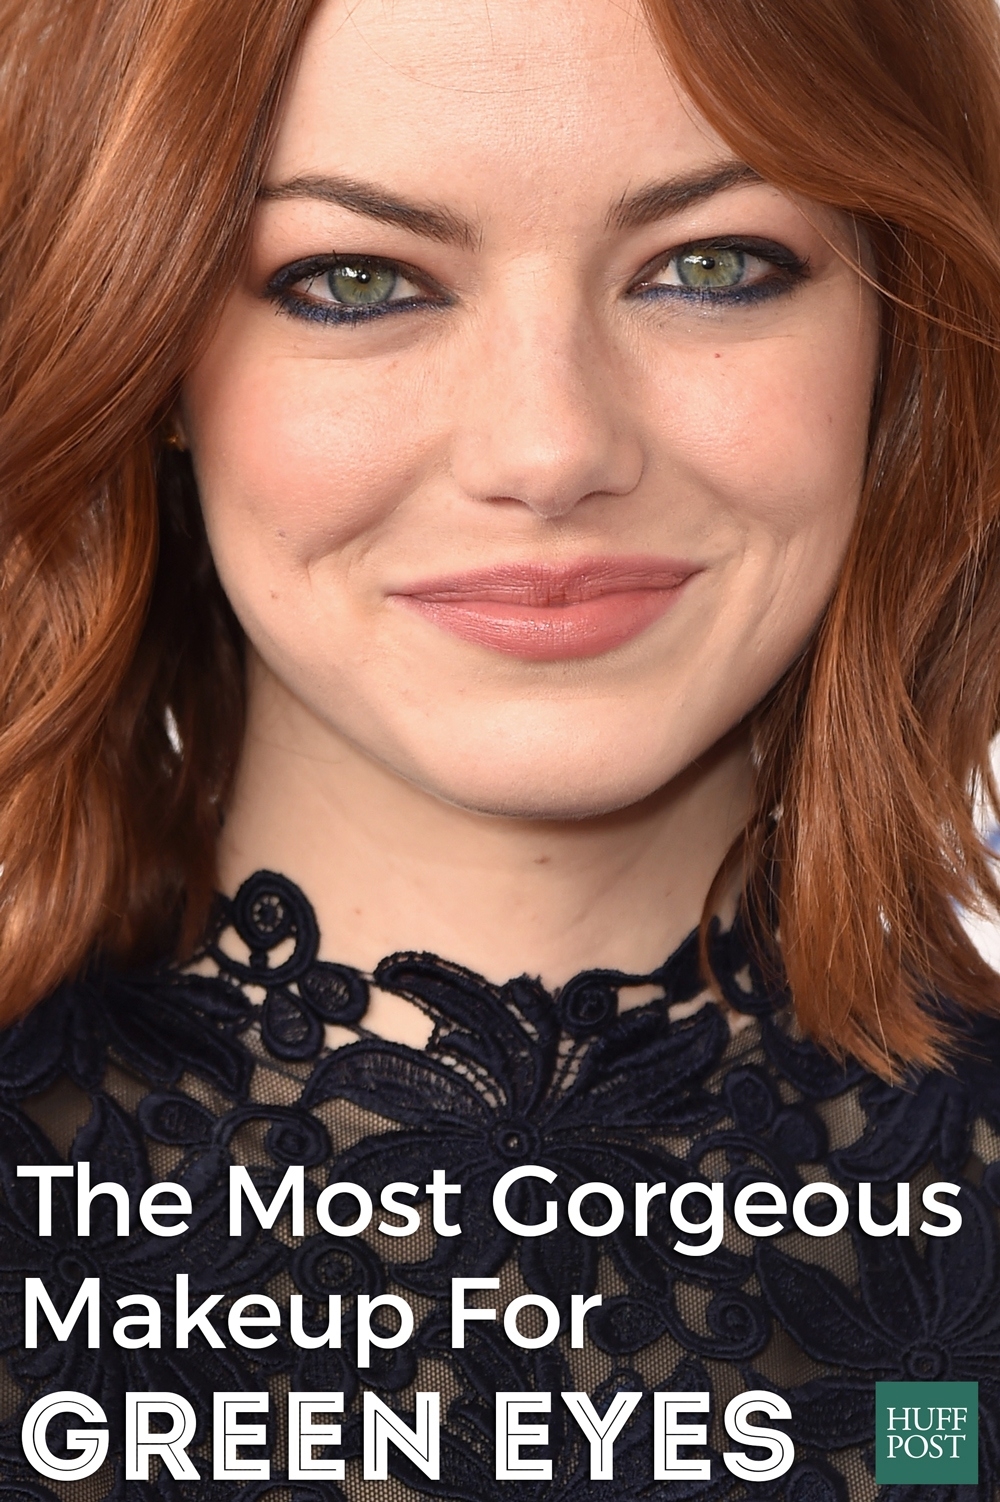 The Most Gorgeous Makeup For Green Eyes | Huffpost Life within Best Eyeshadow Colors For Green Eyes And Red Hair